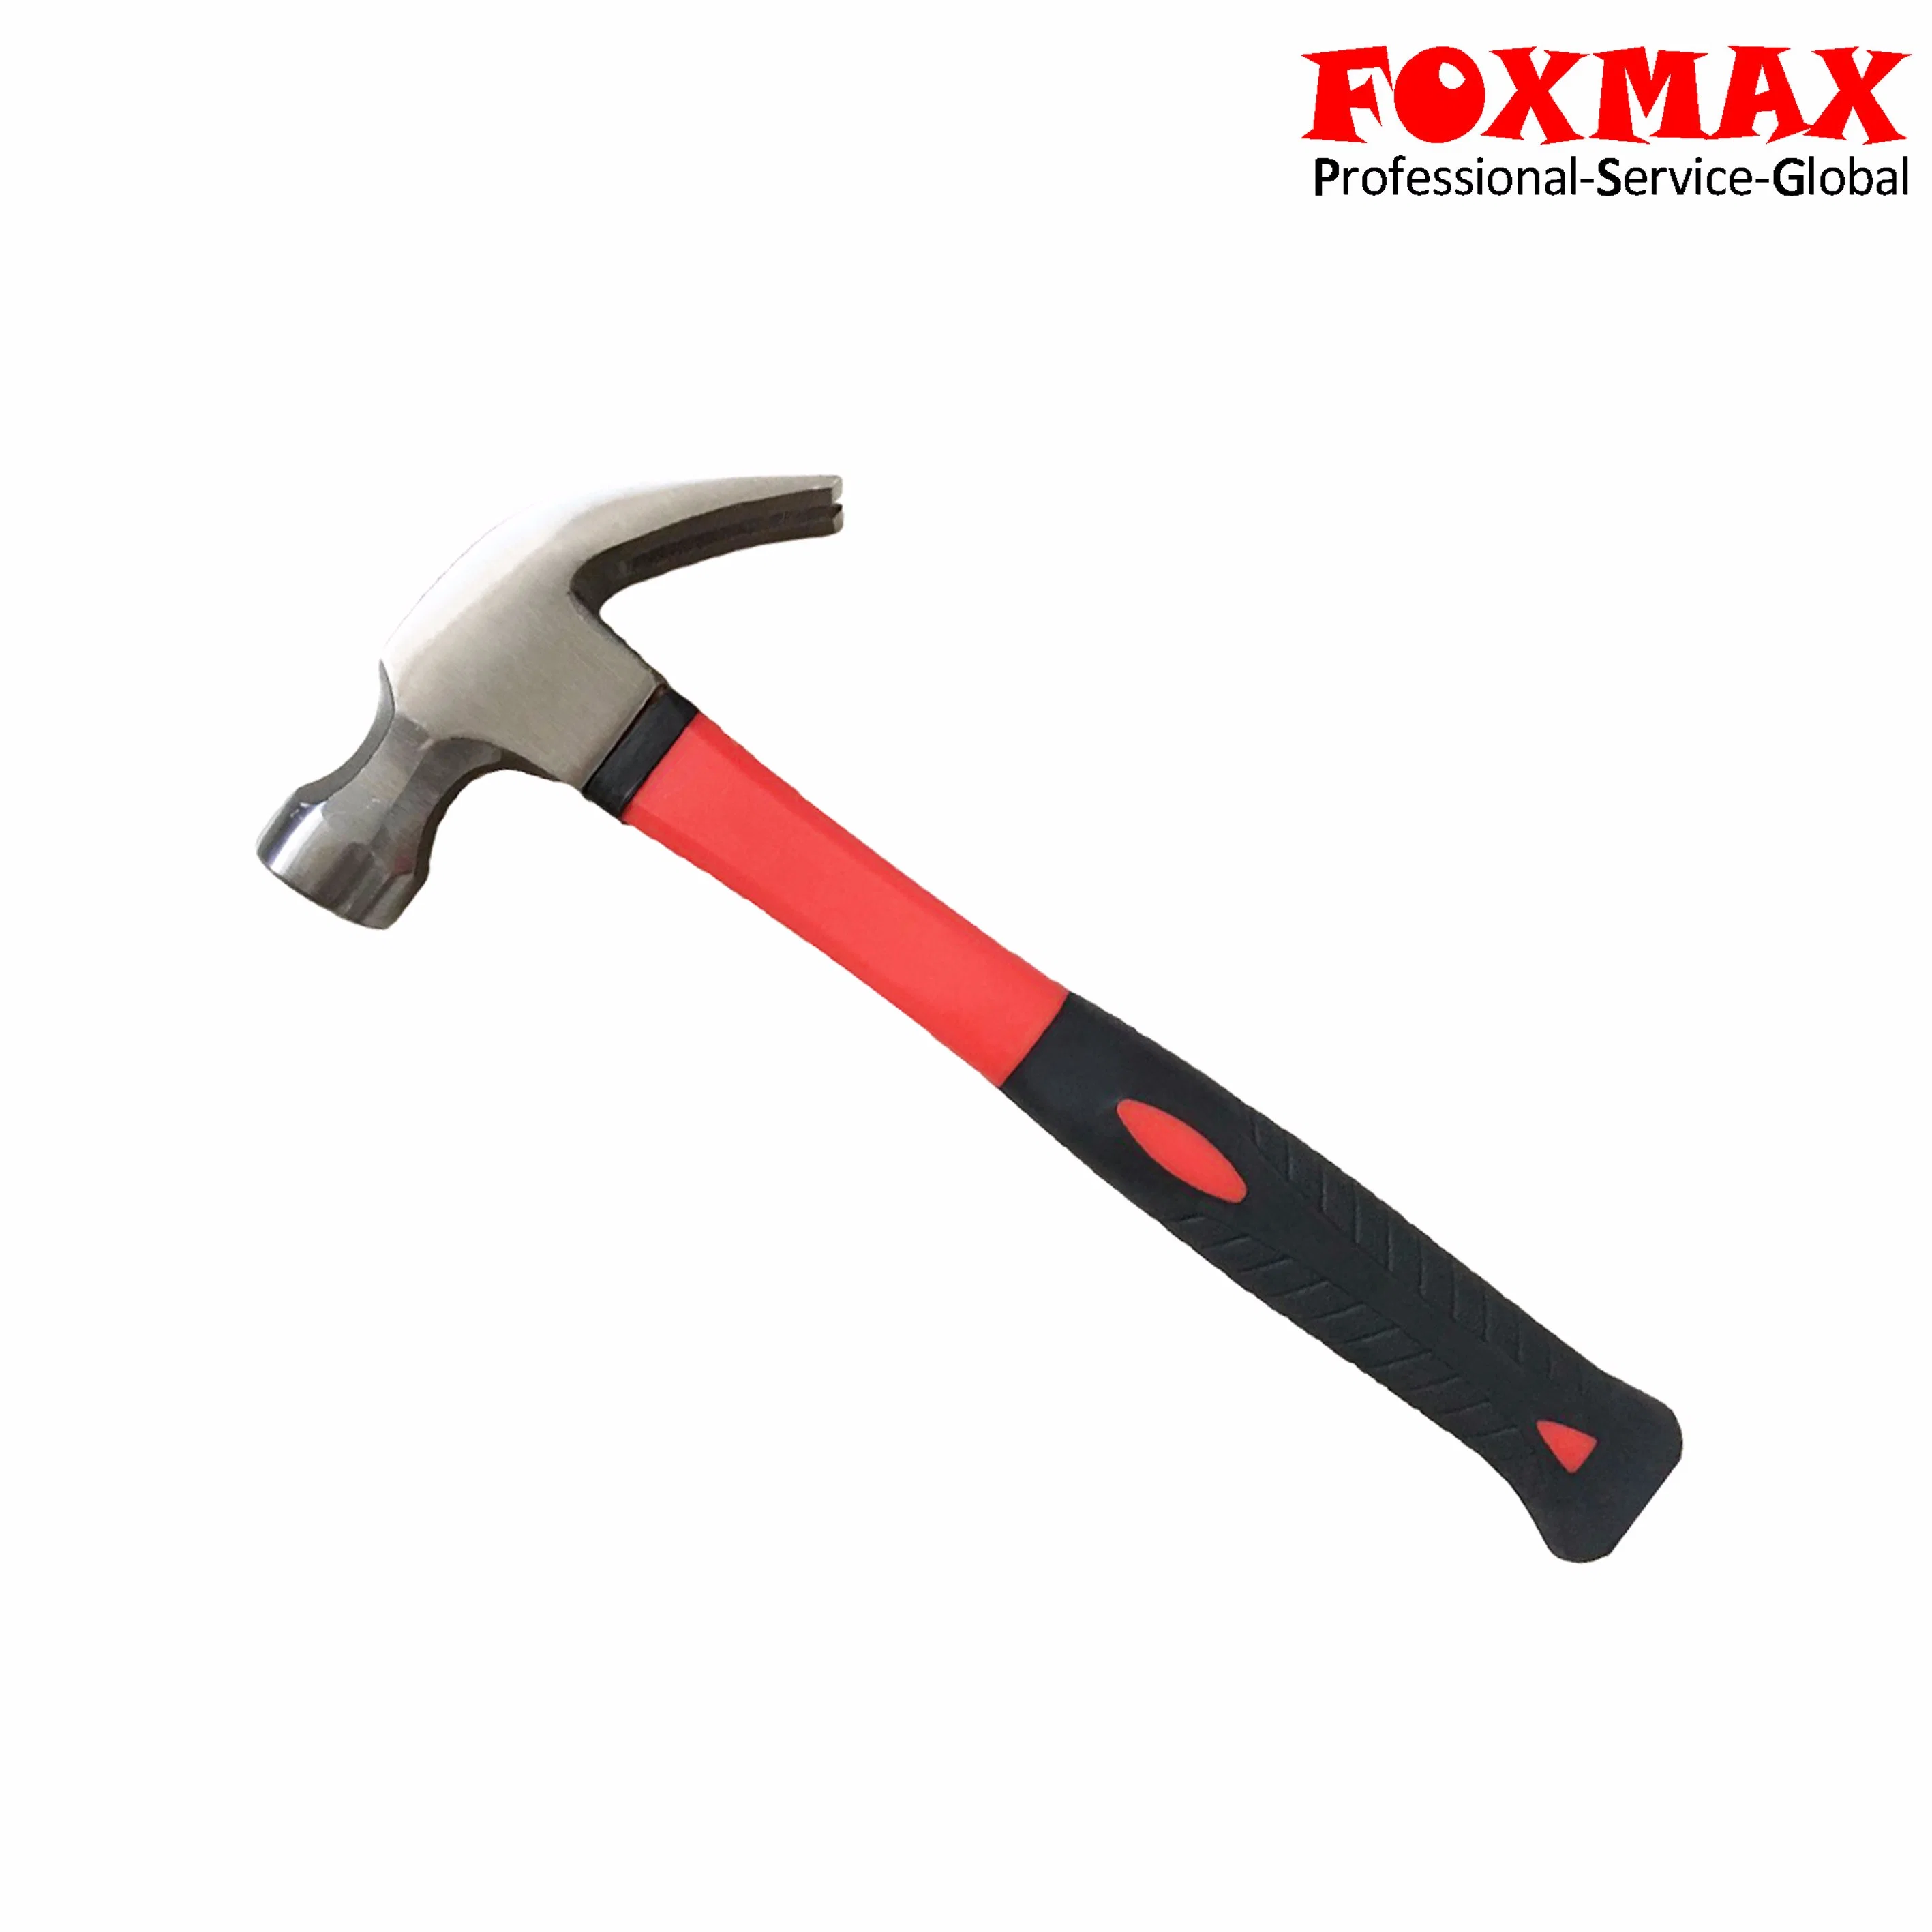 Claw Hammer with Rubber Handle (FM-HM-012)